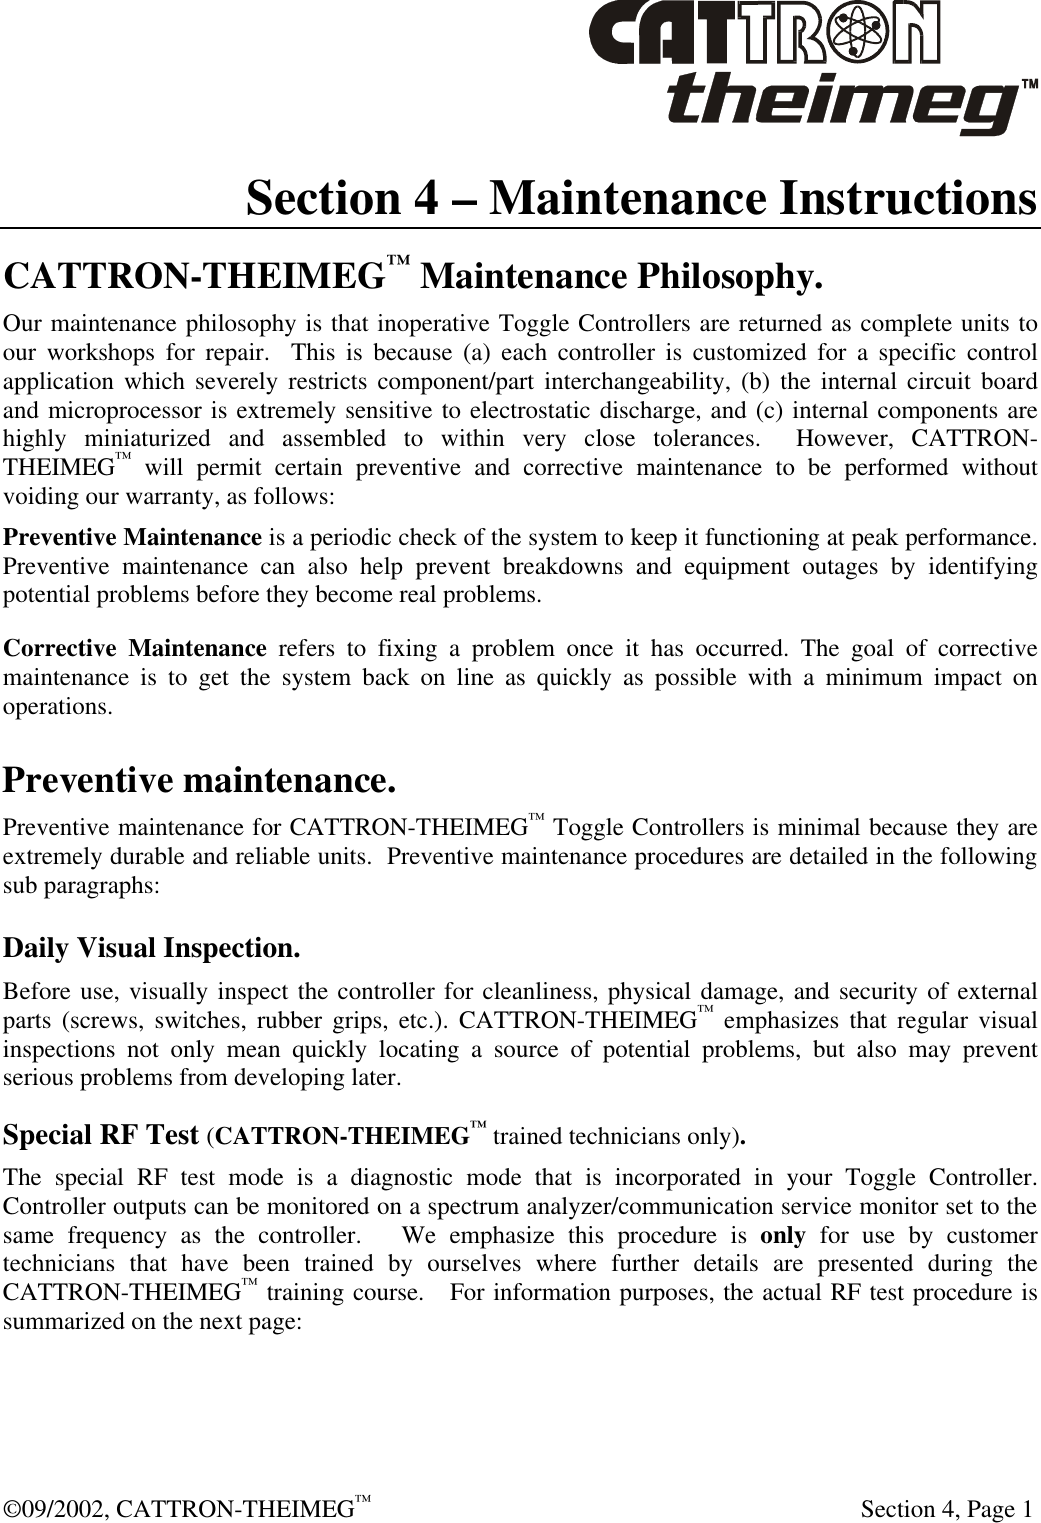  ©09/2002, CATTRON-THEIMEG™   Section 4, Page 1 Section 4 – Maintenance Instructions CATTRON-THEIMEG™ Maintenance Philosophy. Our maintenance philosophy is that inoperative Toggle Controllers are returned as complete units to our workshops for repair.  This is because (a) each controller is customized for a specific control application which severely restricts component/part interchangeability, (b) the internal circuit board and microprocessor is extremely sensitive to electrostatic discharge, and (c) internal components are highly miniaturized and assembled to within very close tolerances.  However, CATTRON-THEIMEG™ will permit certain preventive and corrective maintenance to be performed without voiding our warranty, as follows:   Preventive Maintenance is a periodic check of the system to keep it functioning at peak performance. Preventive maintenance can also help prevent breakdowns and equipment outages by identifying potential problems before they become real problems.  Corrective Maintenance refers to fixing a problem once it has occurred. The goal of corrective maintenance is to get the system back on line as quickly as possible with a minimum impact on operations. Preventive maintenance. Preventive maintenance for CATTRON-THEIMEG™ Toggle Controllers is minimal because they are extremely durable and reliable units.  Preventive maintenance procedures are detailed in the following sub paragraphs: Daily Visual Inspection. Before use, visually inspect the controller for cleanliness, physical damage, and security of external parts (screws, switches, rubber grips, etc.). CATTRON-THEIMEG™ emphasizes that regular visual inspections not only mean quickly locating a source of potential problems, but also may prevent serious problems from developing later. Special RF Test (CATTRON-THEIMEG™ trained technicians only). The special RF test mode is a diagnostic mode that is incorporated in your Toggle Controller.  Controller outputs can be monitored on a spectrum analyzer/communication service monitor set to the same frequency as the controller.   We emphasize this procedure is only for use by customer technicians that have been trained by ourselves where further details are presented during the CATTRON-THEIMEG™ training course.   For information purposes, the actual RF test procedure is summarized on the next page:   